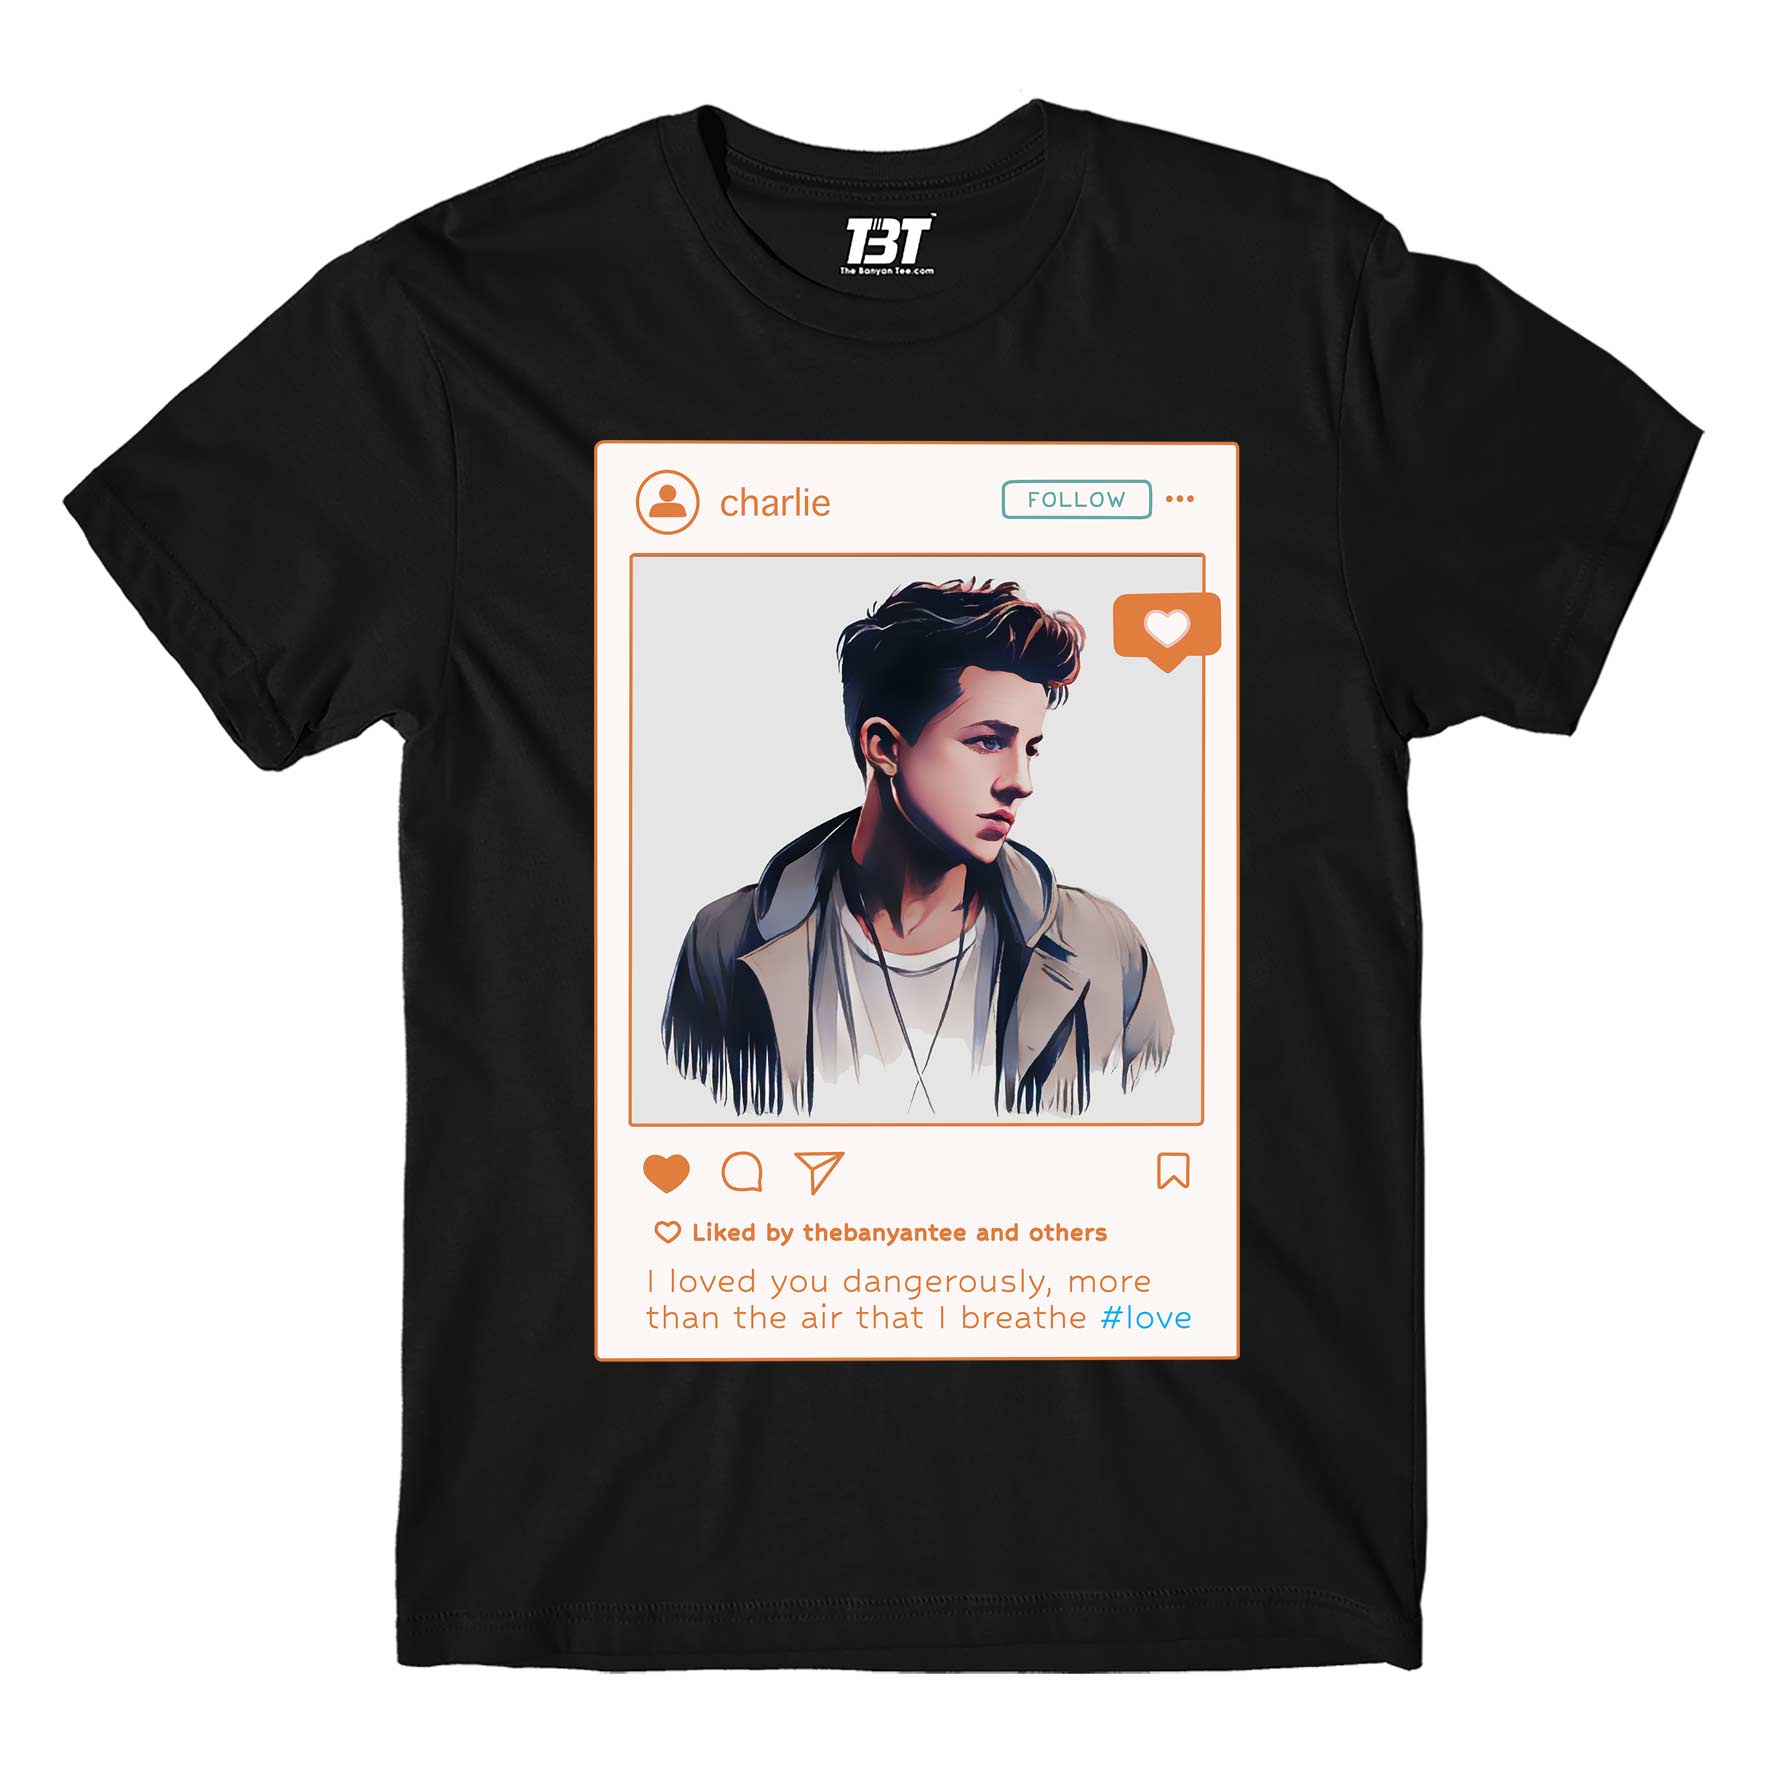 charlie puth dangerously t-shirt music band buy online india the banyan tee tbt men women girls boys unisex white i loved you dangerously more than the air that i breathe